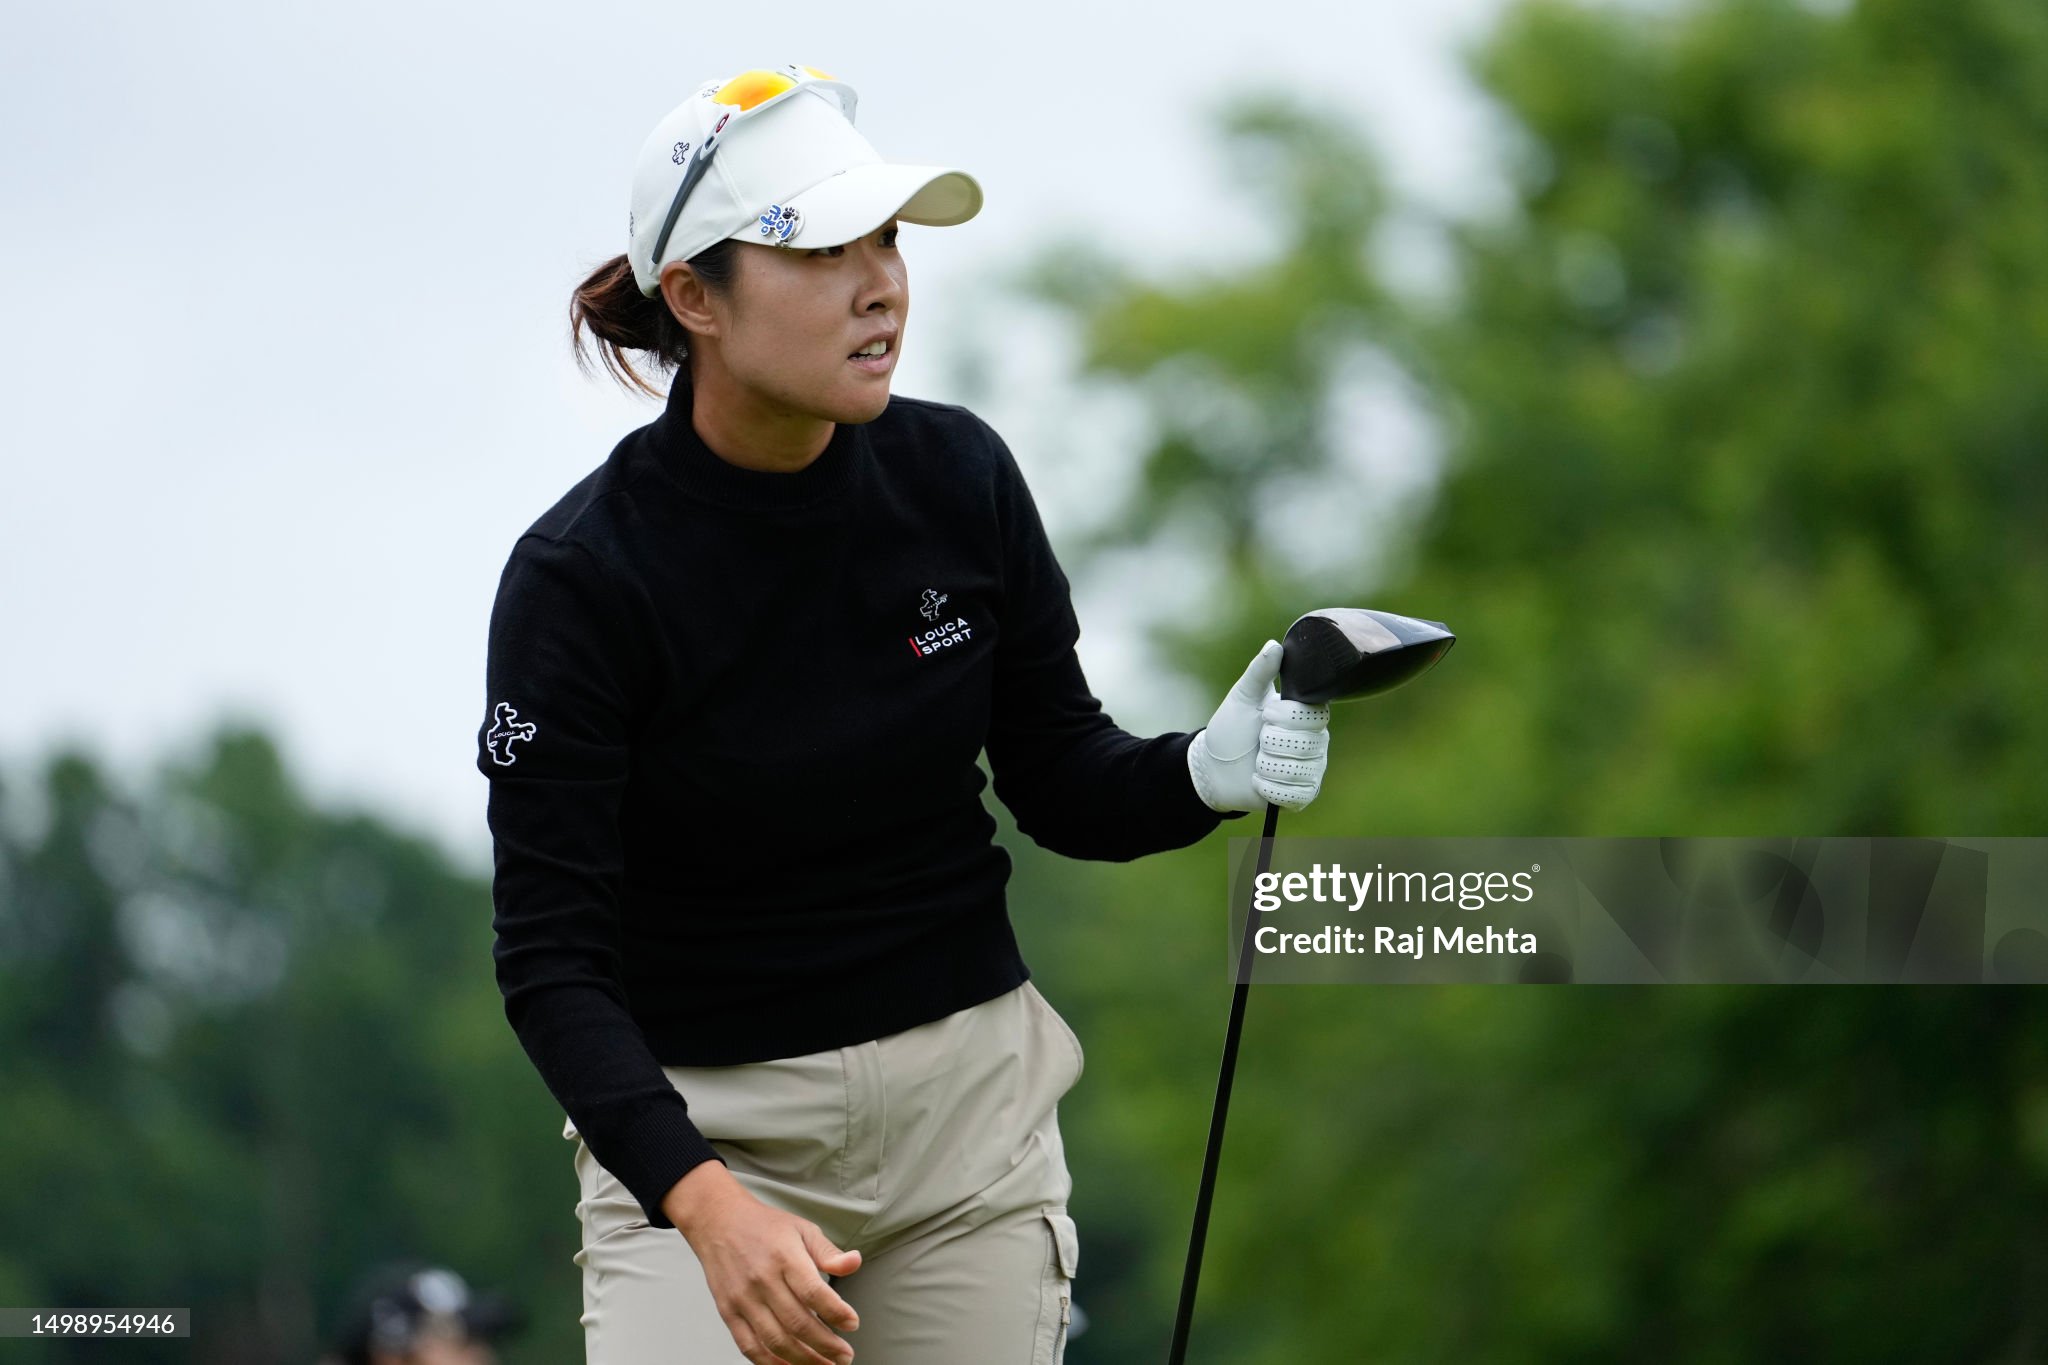 https://media.gettyimages.com/id/1498954946/photo/meijer-lpga-classic-for-simply-give-round-two.jpg?s=2048x2048&w=gi&k=20&c=4nBcLrxFbSXXJgnfx2gnHUnGt8M_ZTolEZGQFhhaKVE=